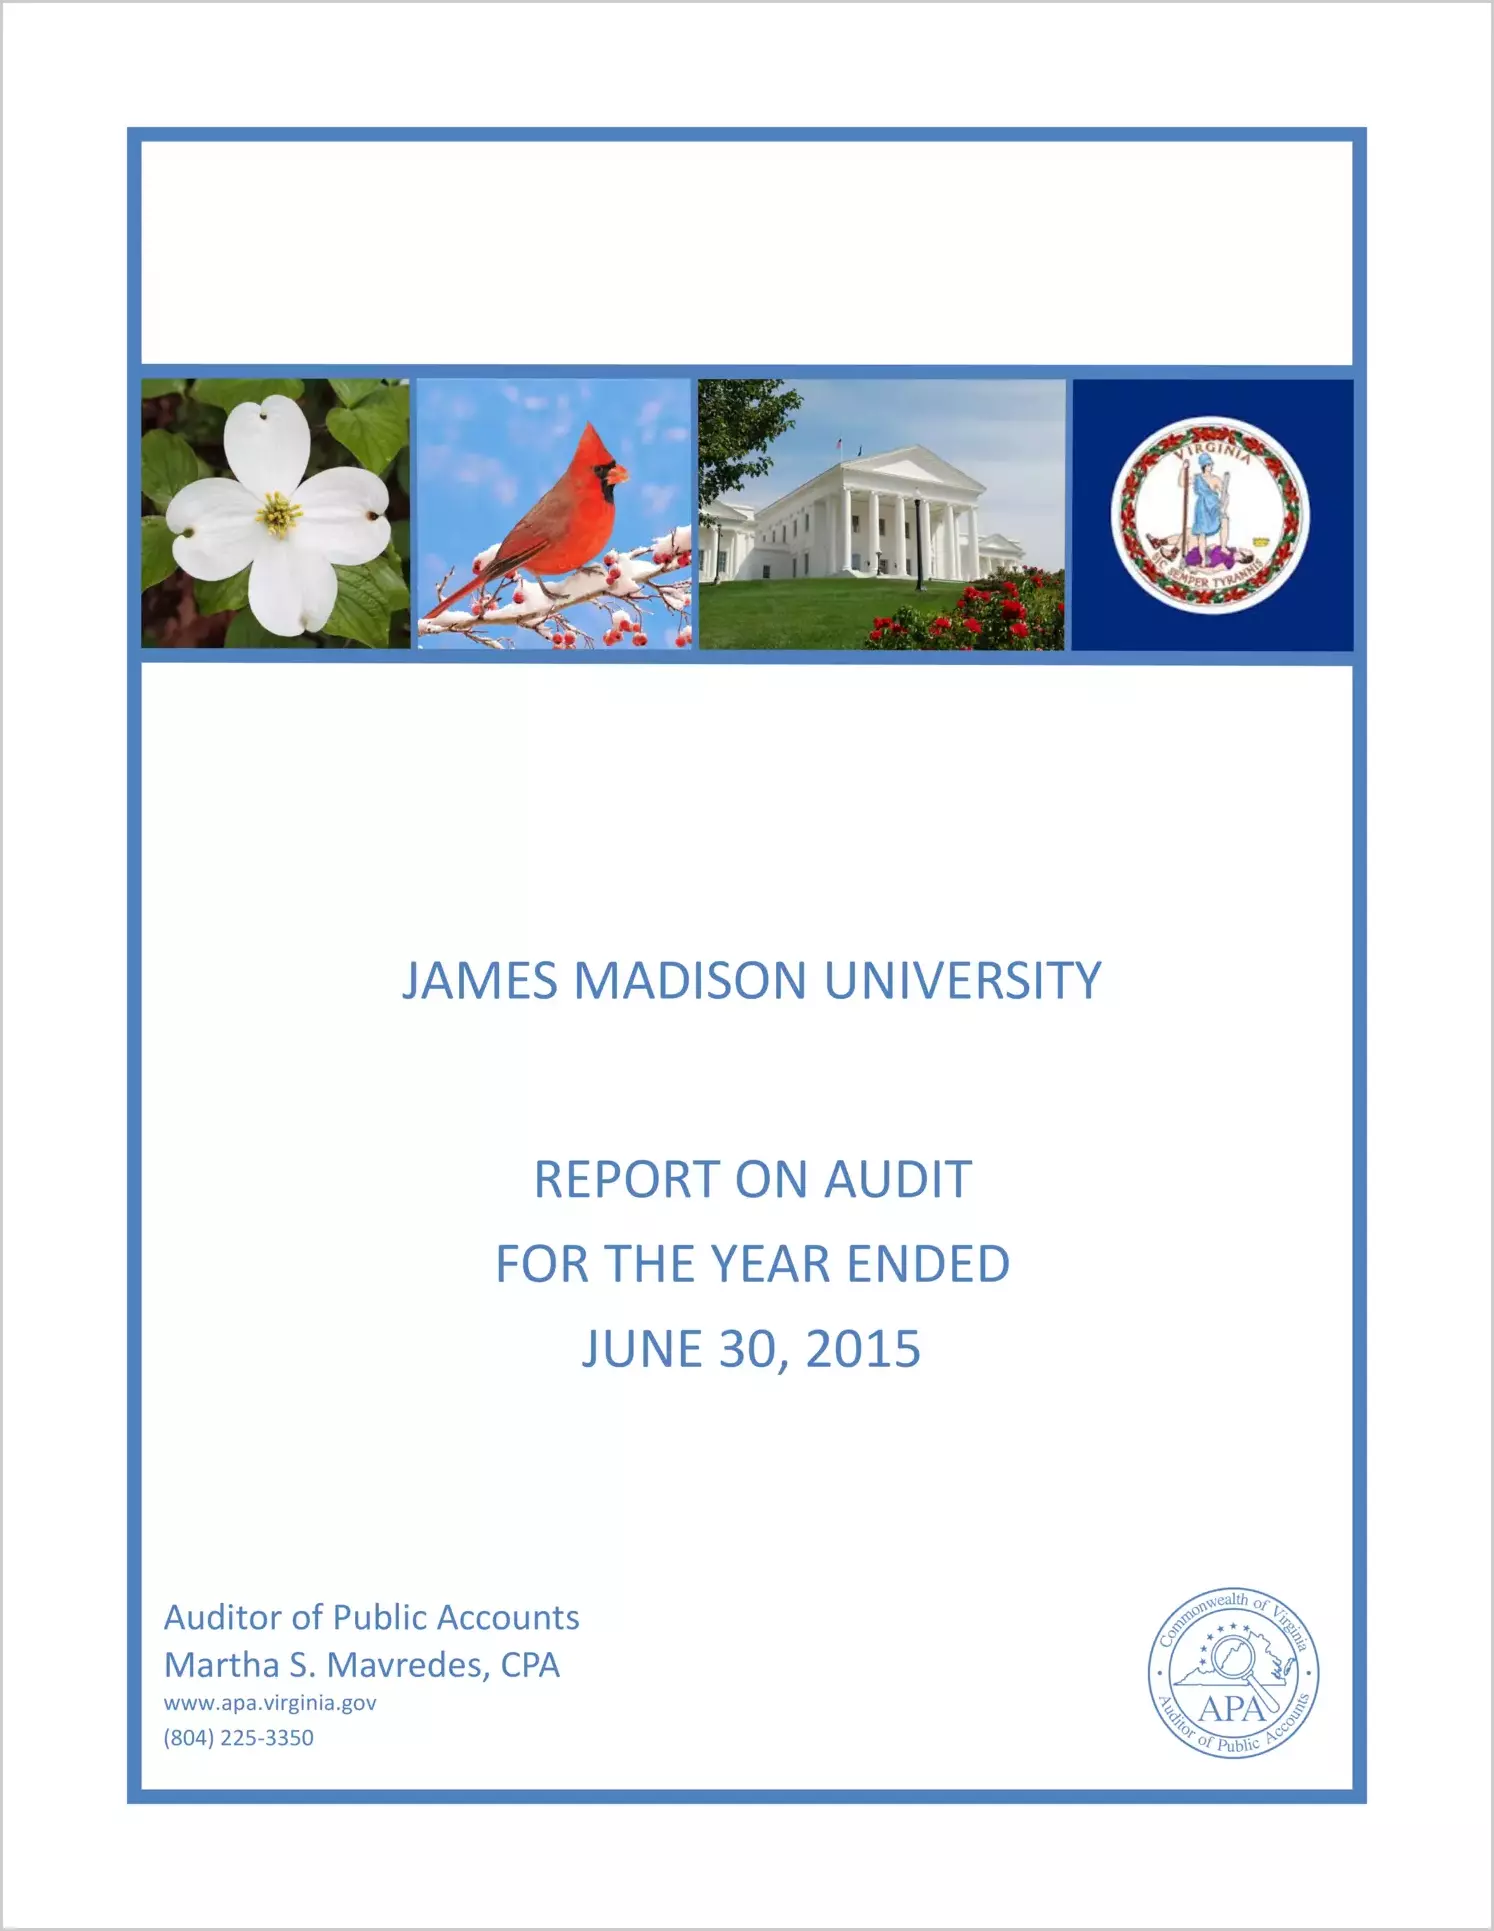 James Madison University for the year ended June 30, 2015